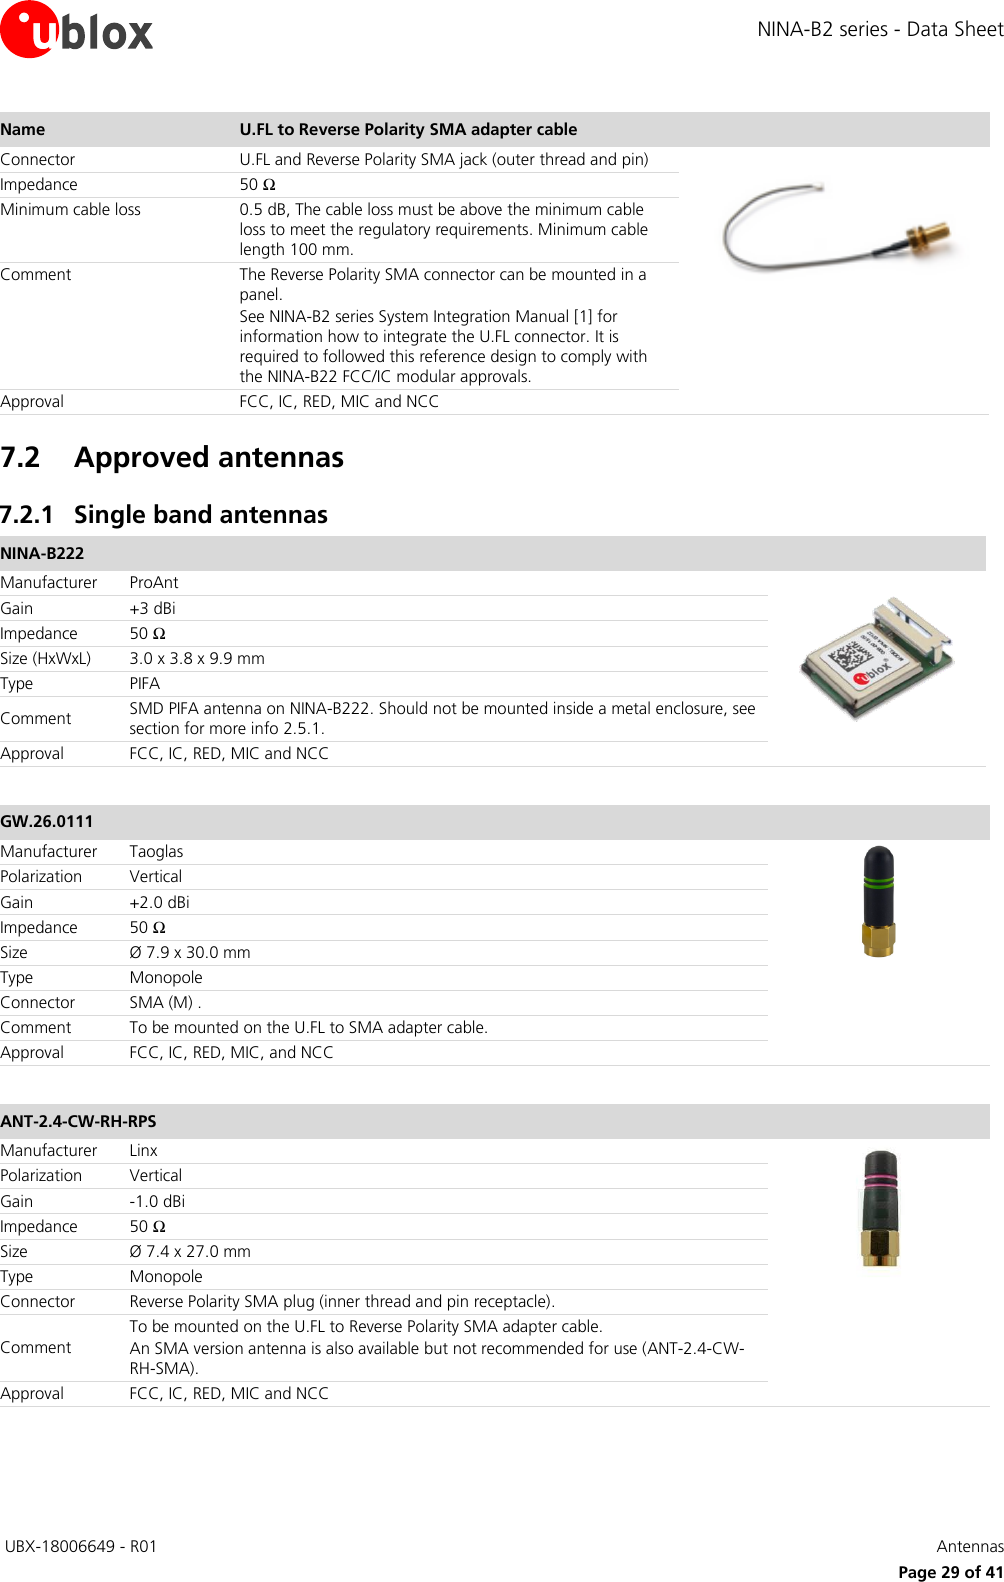 NINA-B2 series - Data Sheet  UBX-18006649 - R01   Antennas     Page 29 of 41 Name U.FL to Reverse Polarity SMA adapter cable  Connector U.FL and Reverse Polarity SMA jack (outer thread and pin)  Impedance 50 Ω Minimum cable loss 0.5 dB, The cable loss must be above the minimum cable loss to meet the regulatory requirements. Minimum cable length 100 mm. Comment The Reverse Polarity SMA connector can be mounted in a panel.  See NINA-B2 series System Integration Manual [1] for  information how to integrate the U.FL connector. It is required to followed this reference design to comply with the NINA-B22 FCC/IC modular approvals. Approval FCC, IC, RED, MIC and NCC 7.2 Approved antennas 7.2.1 Single band antennas NINA-B222  Manufacturer ProAnt   Gain +3 dBi Impedance 50 Ω Size (HxWxL) 3.0 x 3.8 x 9.9 mm Type PIFA Comment SMD PIFA antenna on NINA-B222. Should not be mounted inside a metal enclosure, see section for more info 2.5.1. Approval FCC, IC, RED, MIC and NCC  GW.26.0111  Manufacturer Taoglas  Polarization Vertical Gain +2.0 dBi Impedance 50 Ω Size Ø 7.9 x 30.0 mm Type Monopole Connector SMA (M) .  Comment To be mounted on the U.FL to SMA adapter cable. Approval FCC, IC, RED, MIC, and NCC  ANT-2.4-CW-RH-RPS  Manufacturer Linx  Polarization Vertical Gain -1.0 dBi Impedance 50 Ω Size Ø 7.4 x 27.0 mm Type Monopole Connector Reverse Polarity SMA plug (inner thread and pin receptacle).  Comment To be mounted on the U.FL to Reverse Polarity SMA adapter cable. An SMA version antenna is also available but not recommended for use (ANT-2.4-CW-RH-SMA). Approval FCC, IC, RED, MIC and NCC  